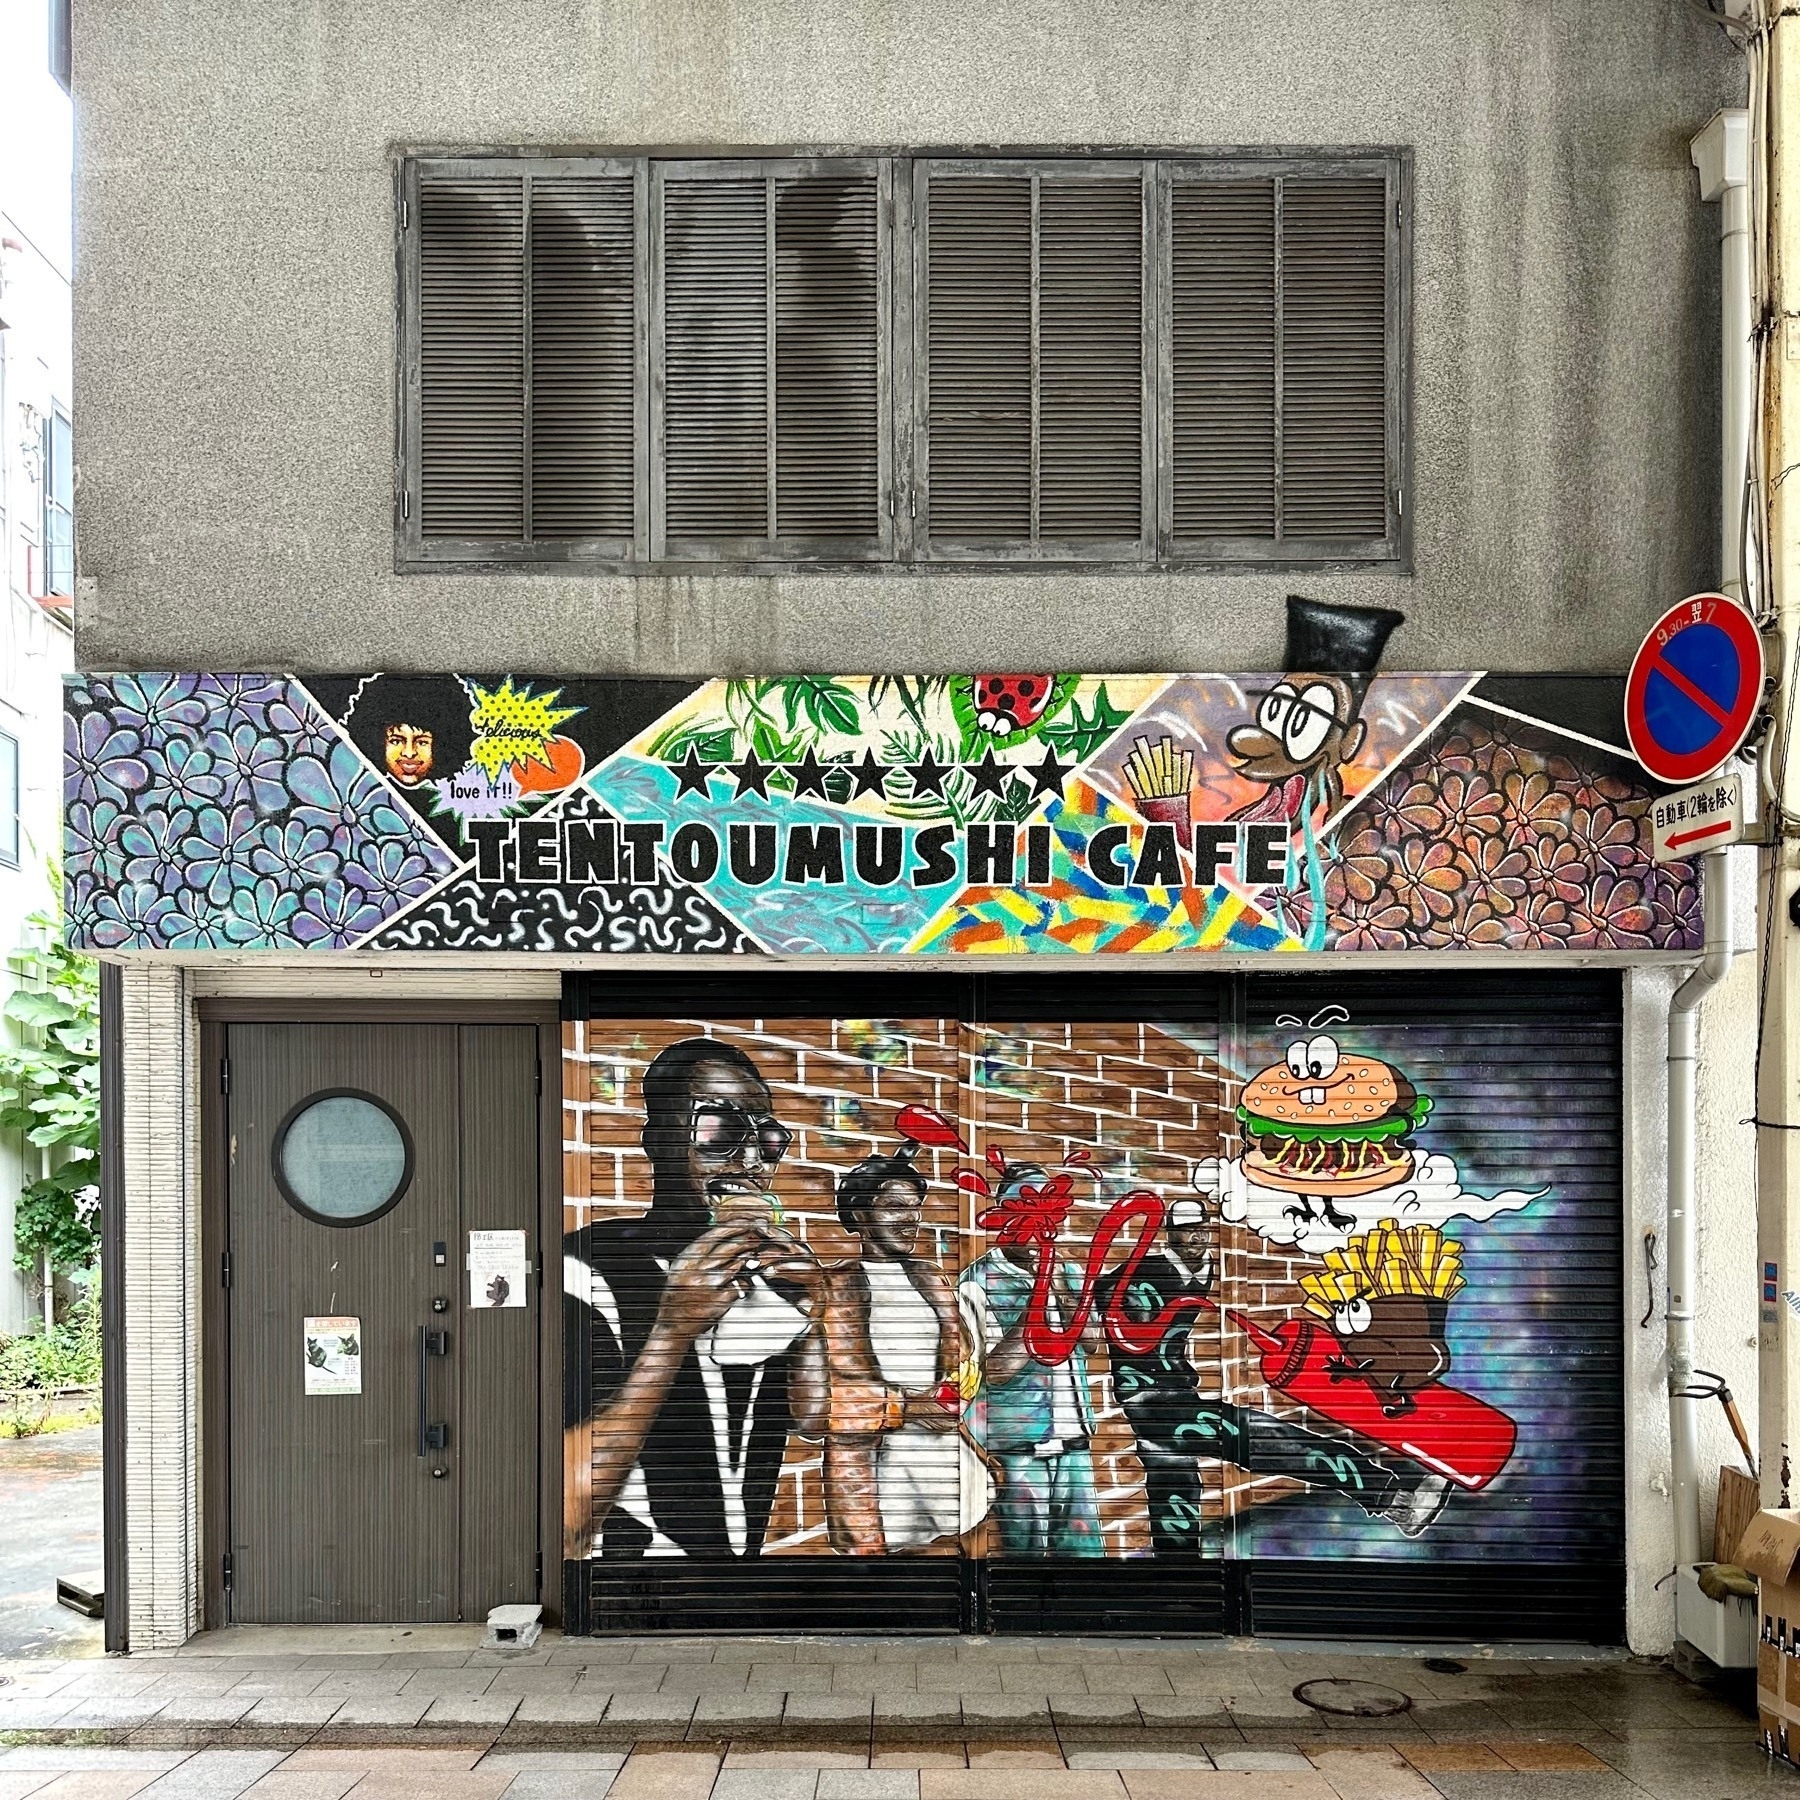 Closed storefront of a cafe called TENTOUMUSHI, meaning ladybird/ladybug in Japanese, with a mural on the shutters of several people eating, a burger, and fries spraying ketchup